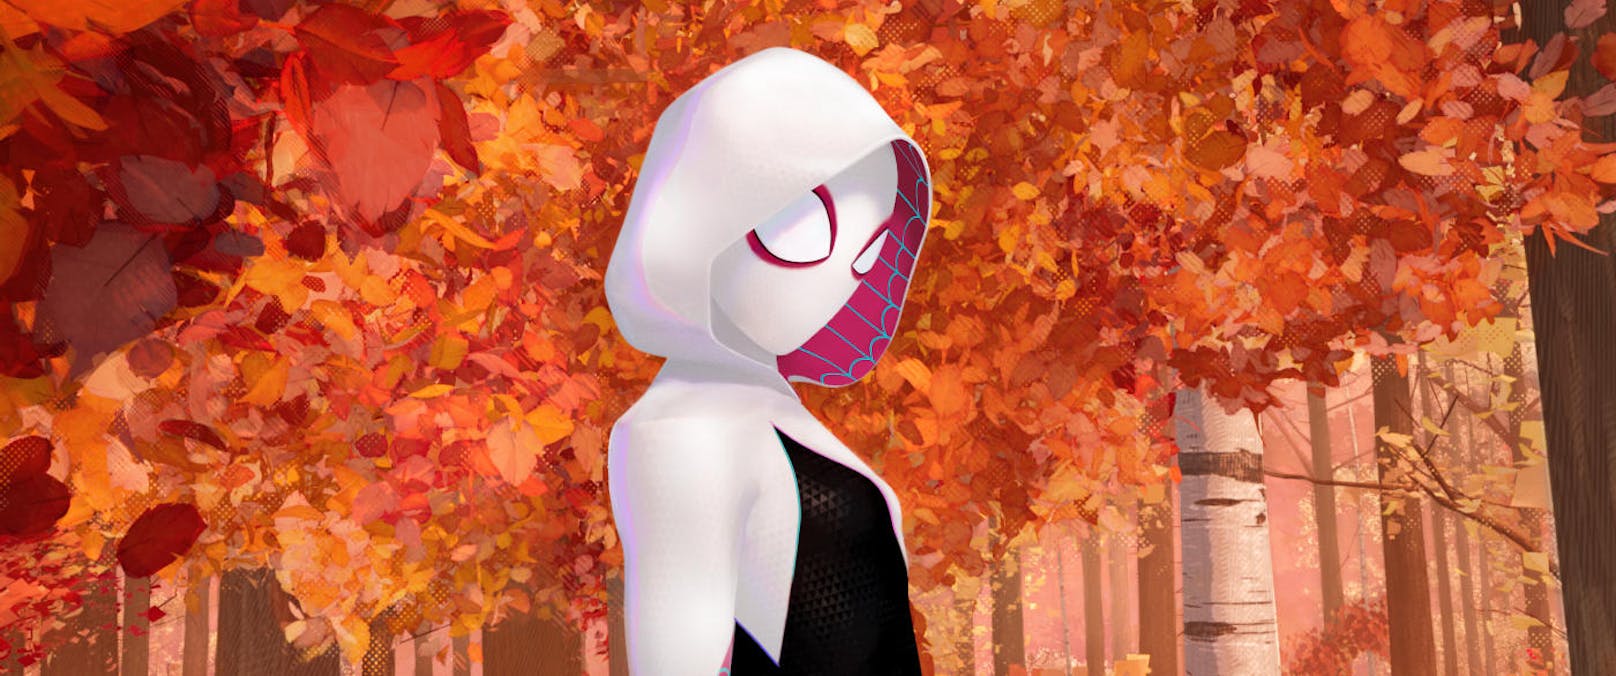 Gwen Stacy in "Spider-Man: A New Universe"